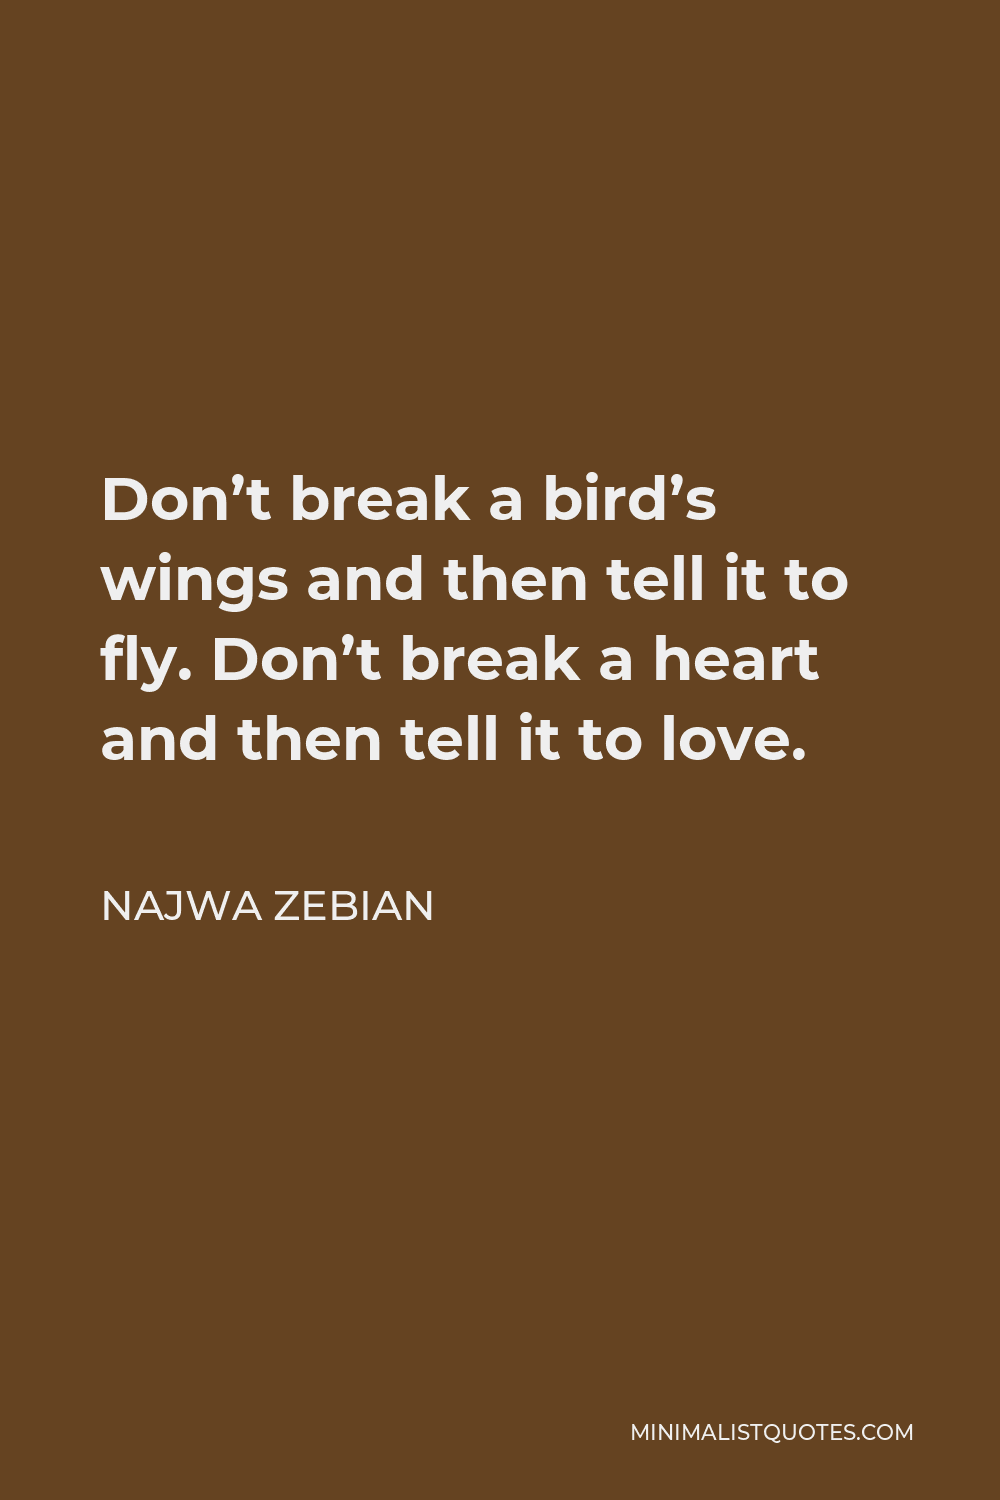 Najwa Zebian Quote - Don’t break a bird’s wings and then tell it to fly. Don’t break a heart and then tell it to love.